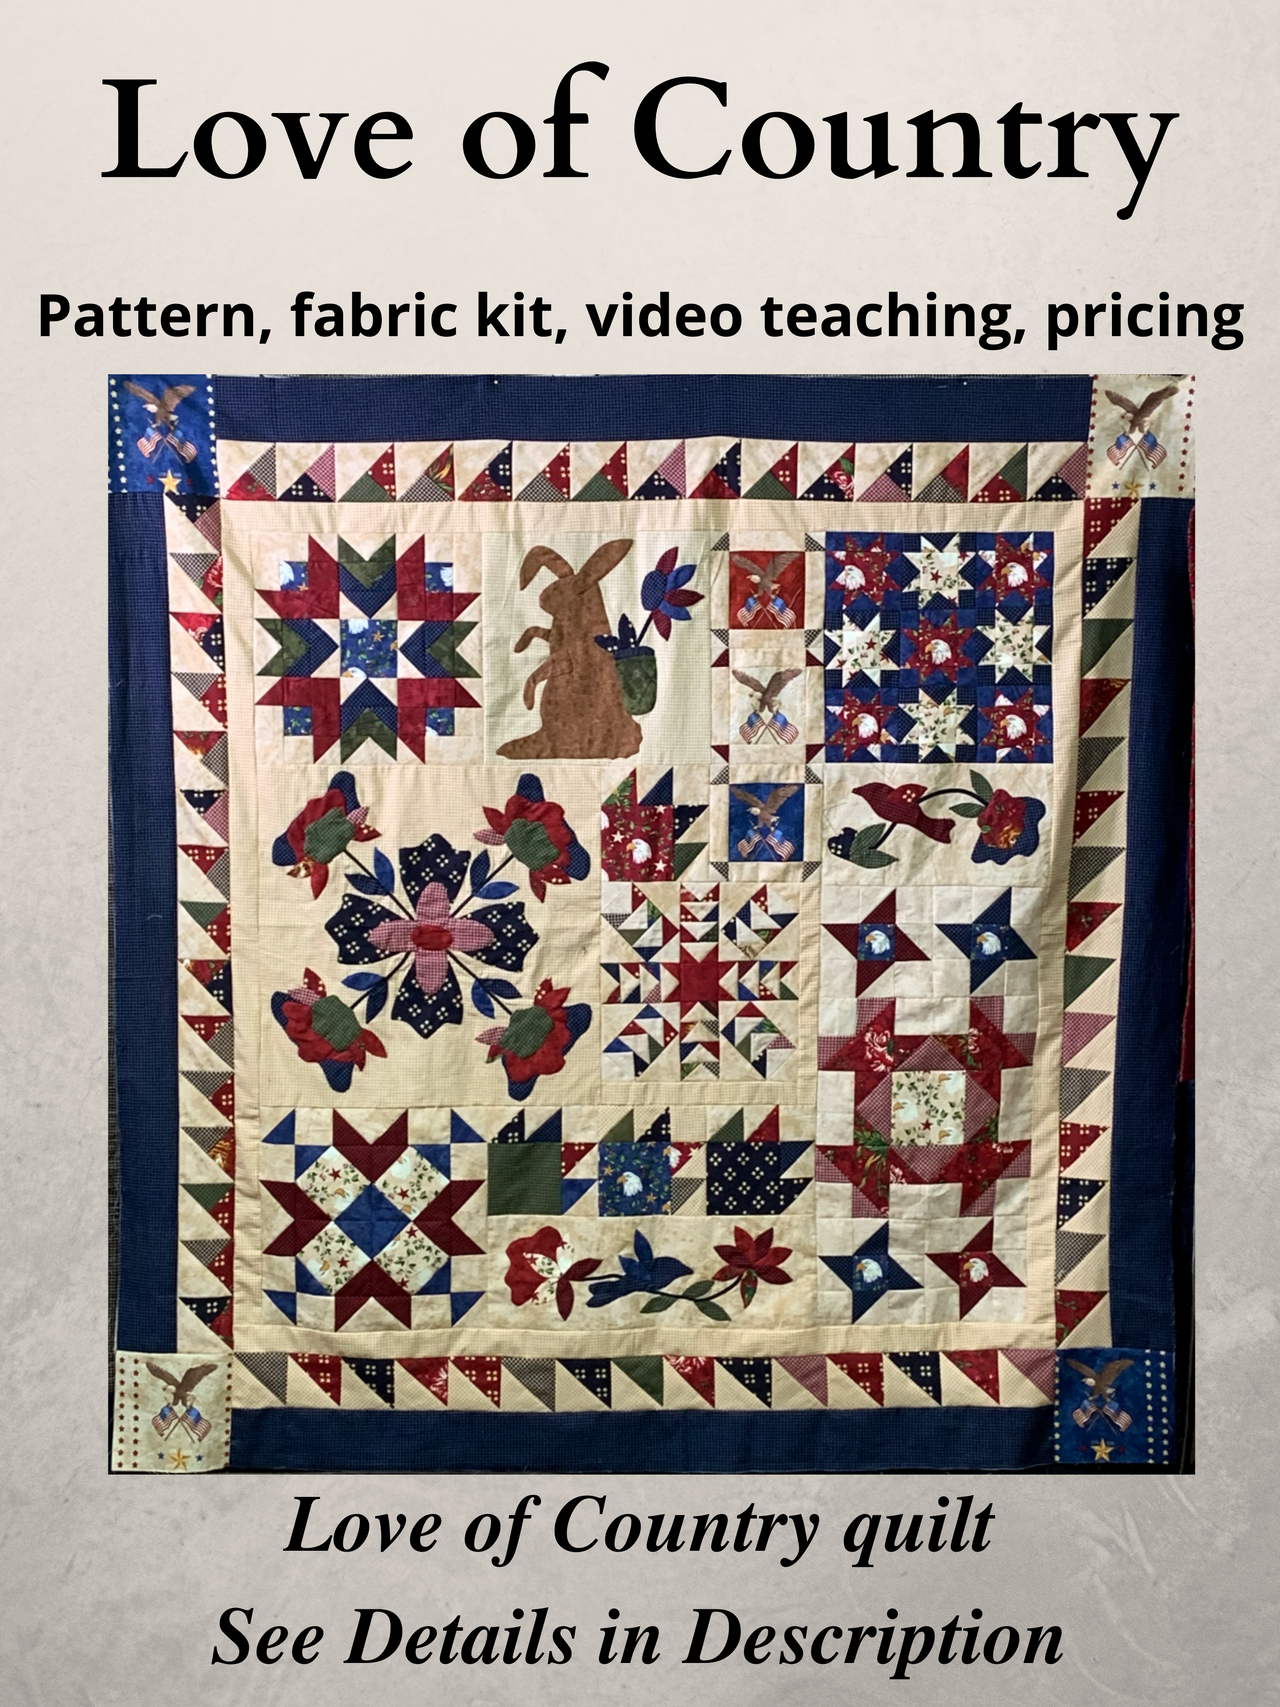 Love of Country fabric kits, ePattern & video teaching info - low inventory